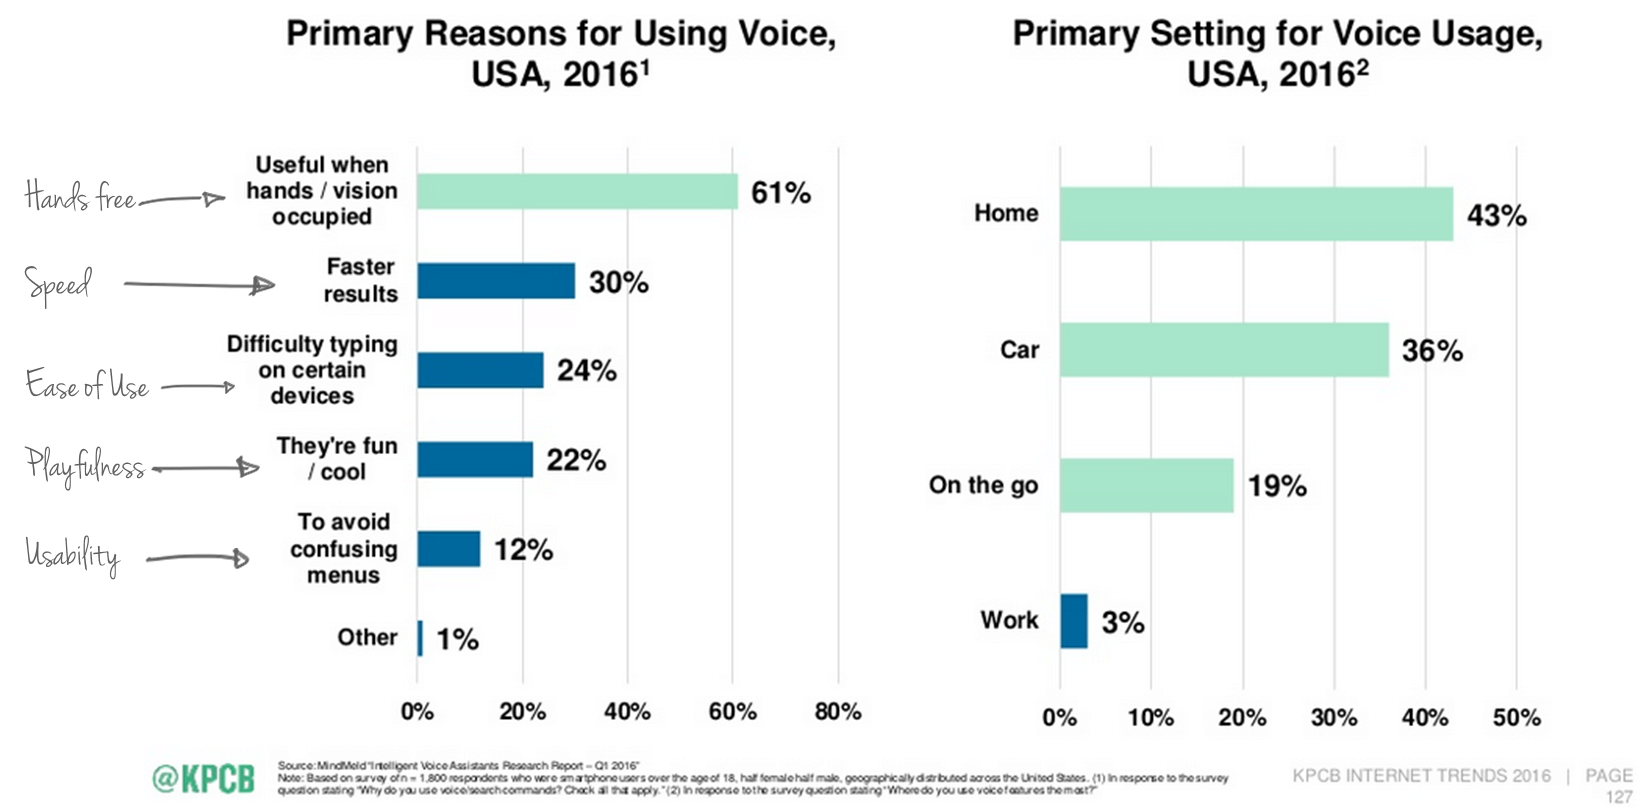 Top reasons why people use voice-enabled devices